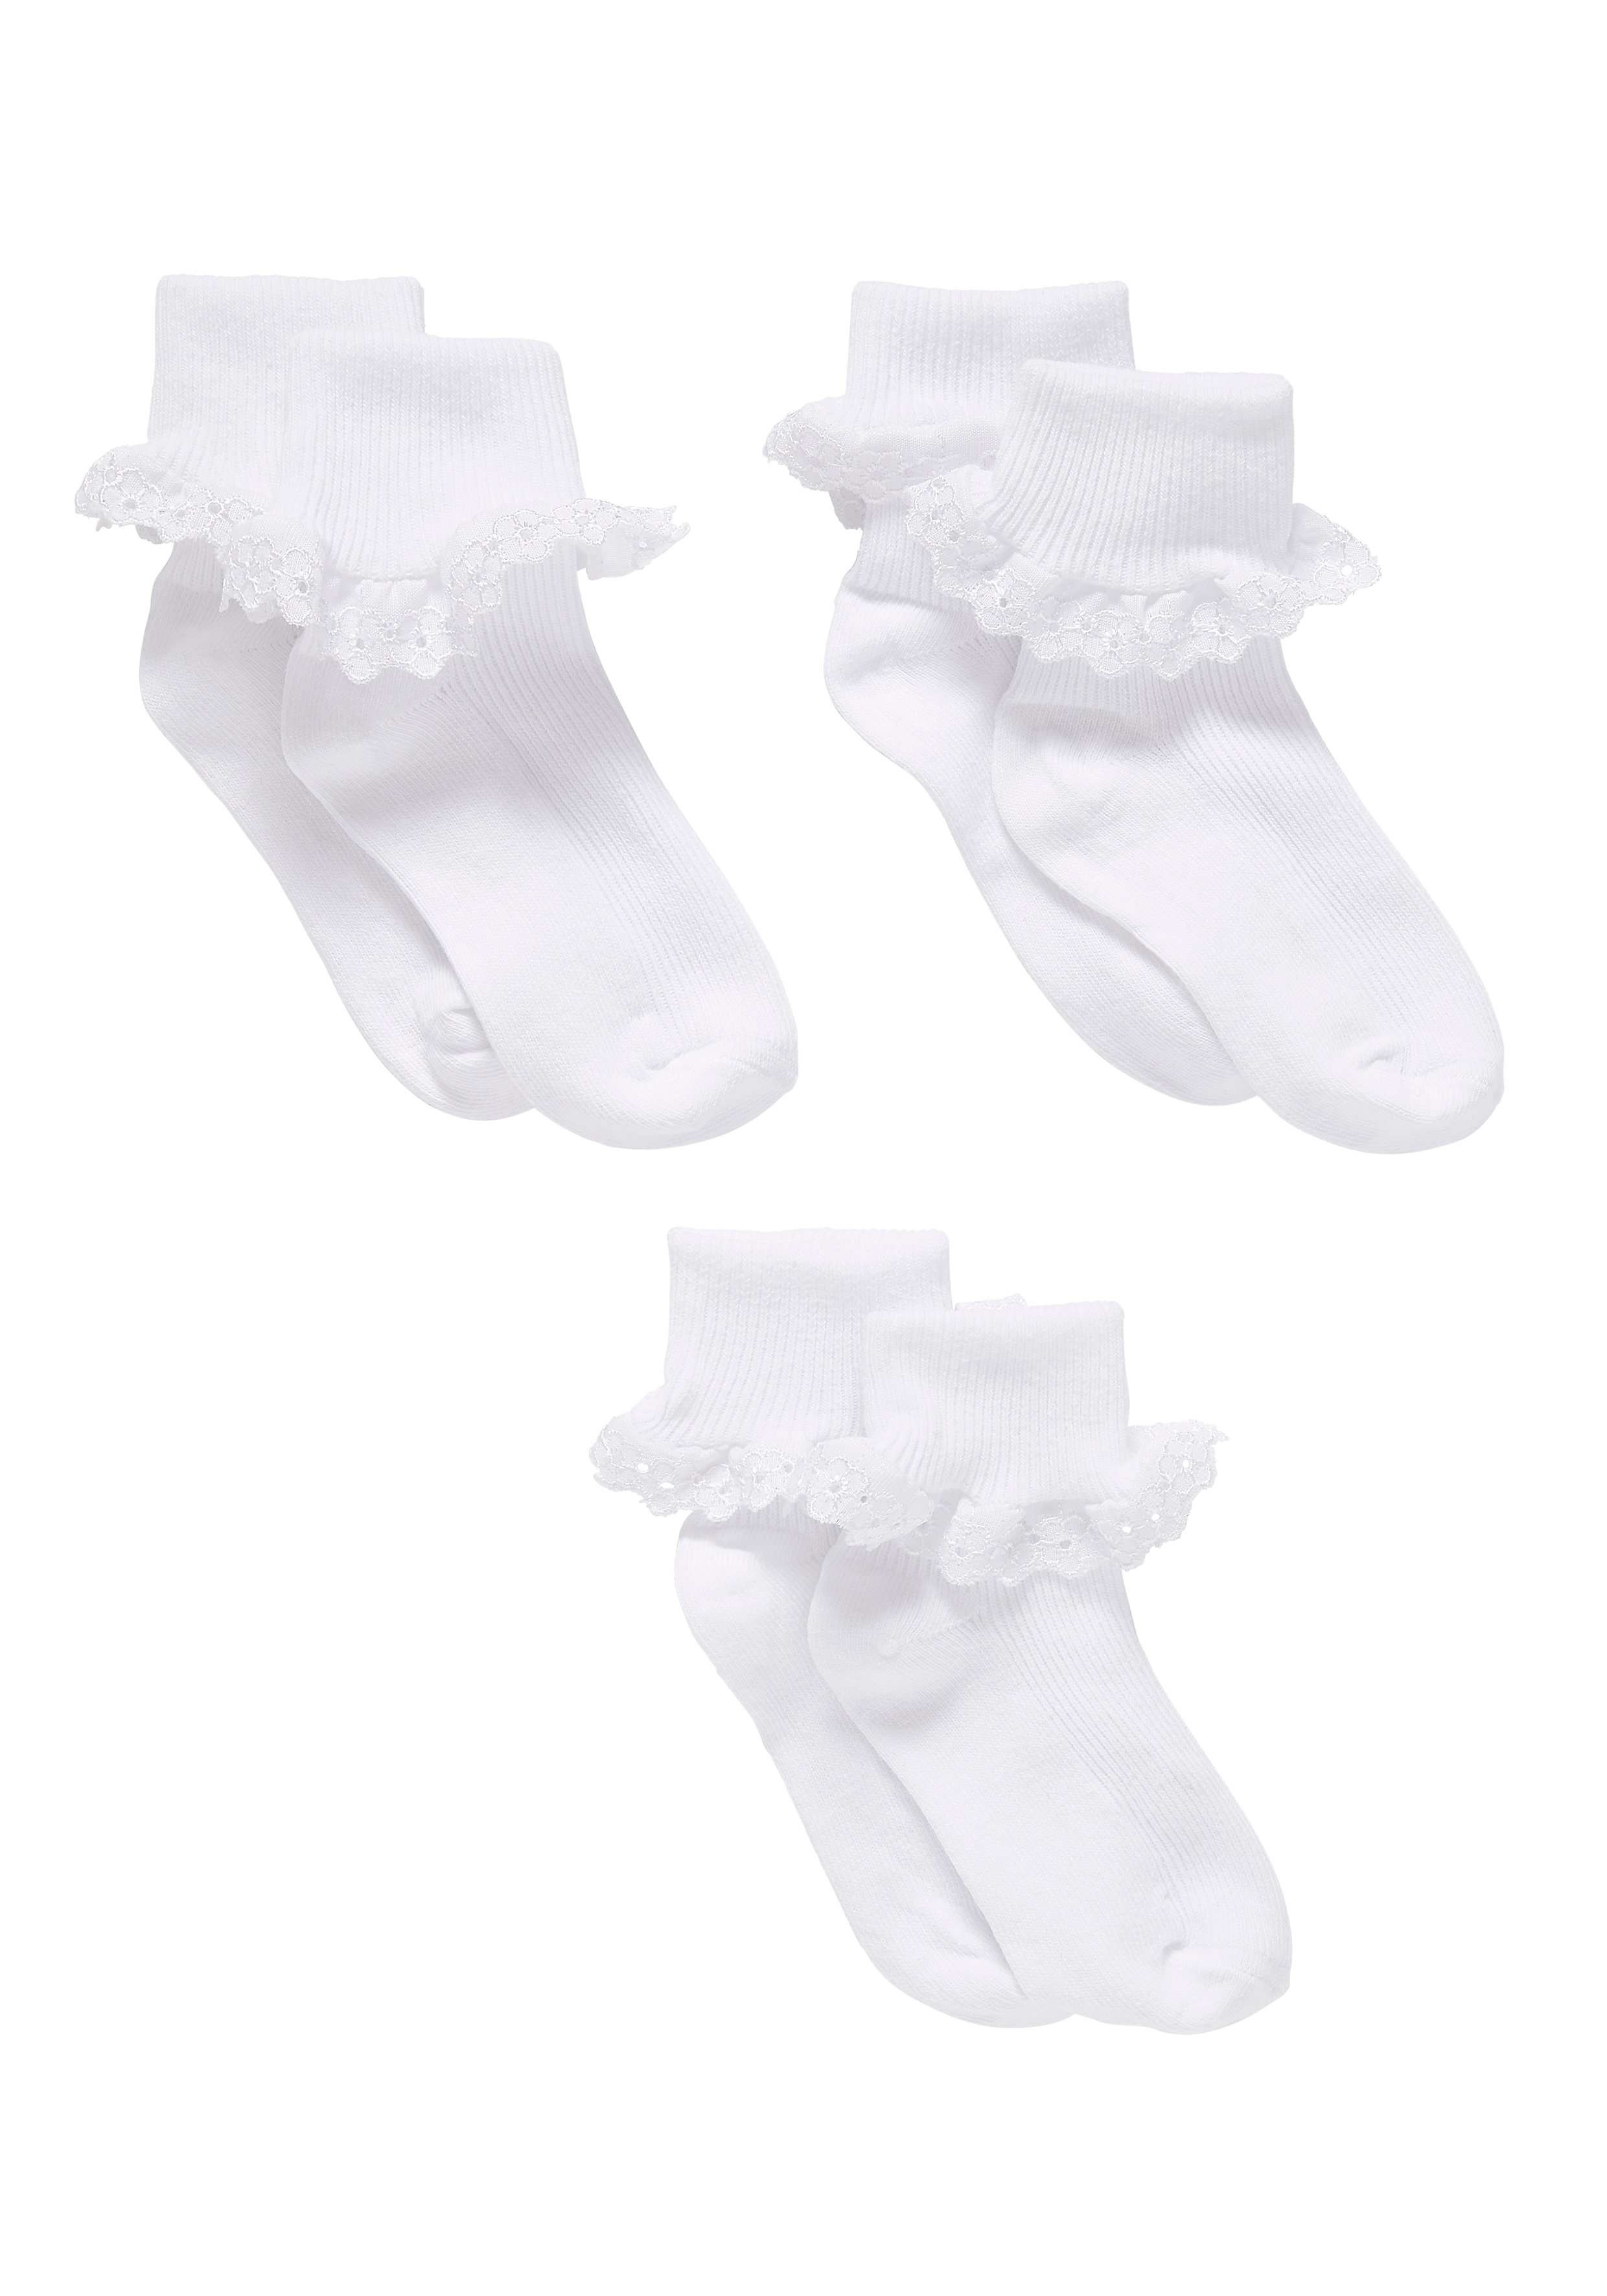 Mothercare | Girls White Lace Turn - Over - Top Socks - 3 Pack - White 0